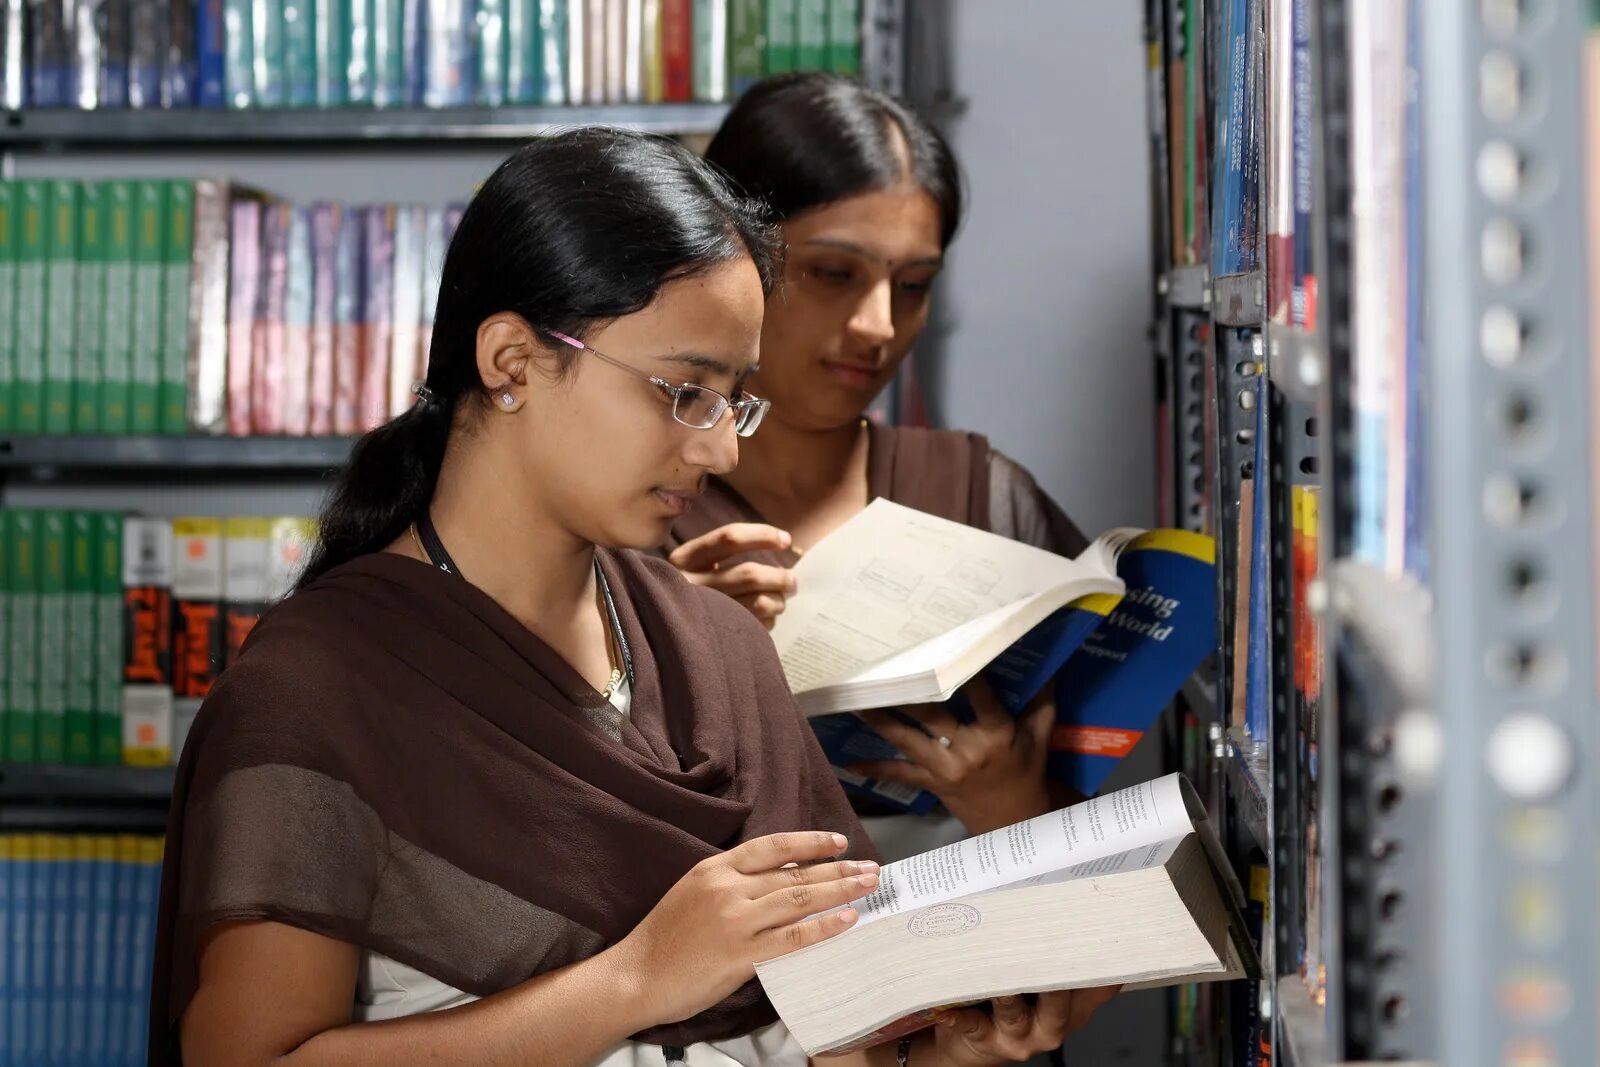 True guide. Indian student. Информация и знание фото. Indian girl in University. Indian girl in Library.